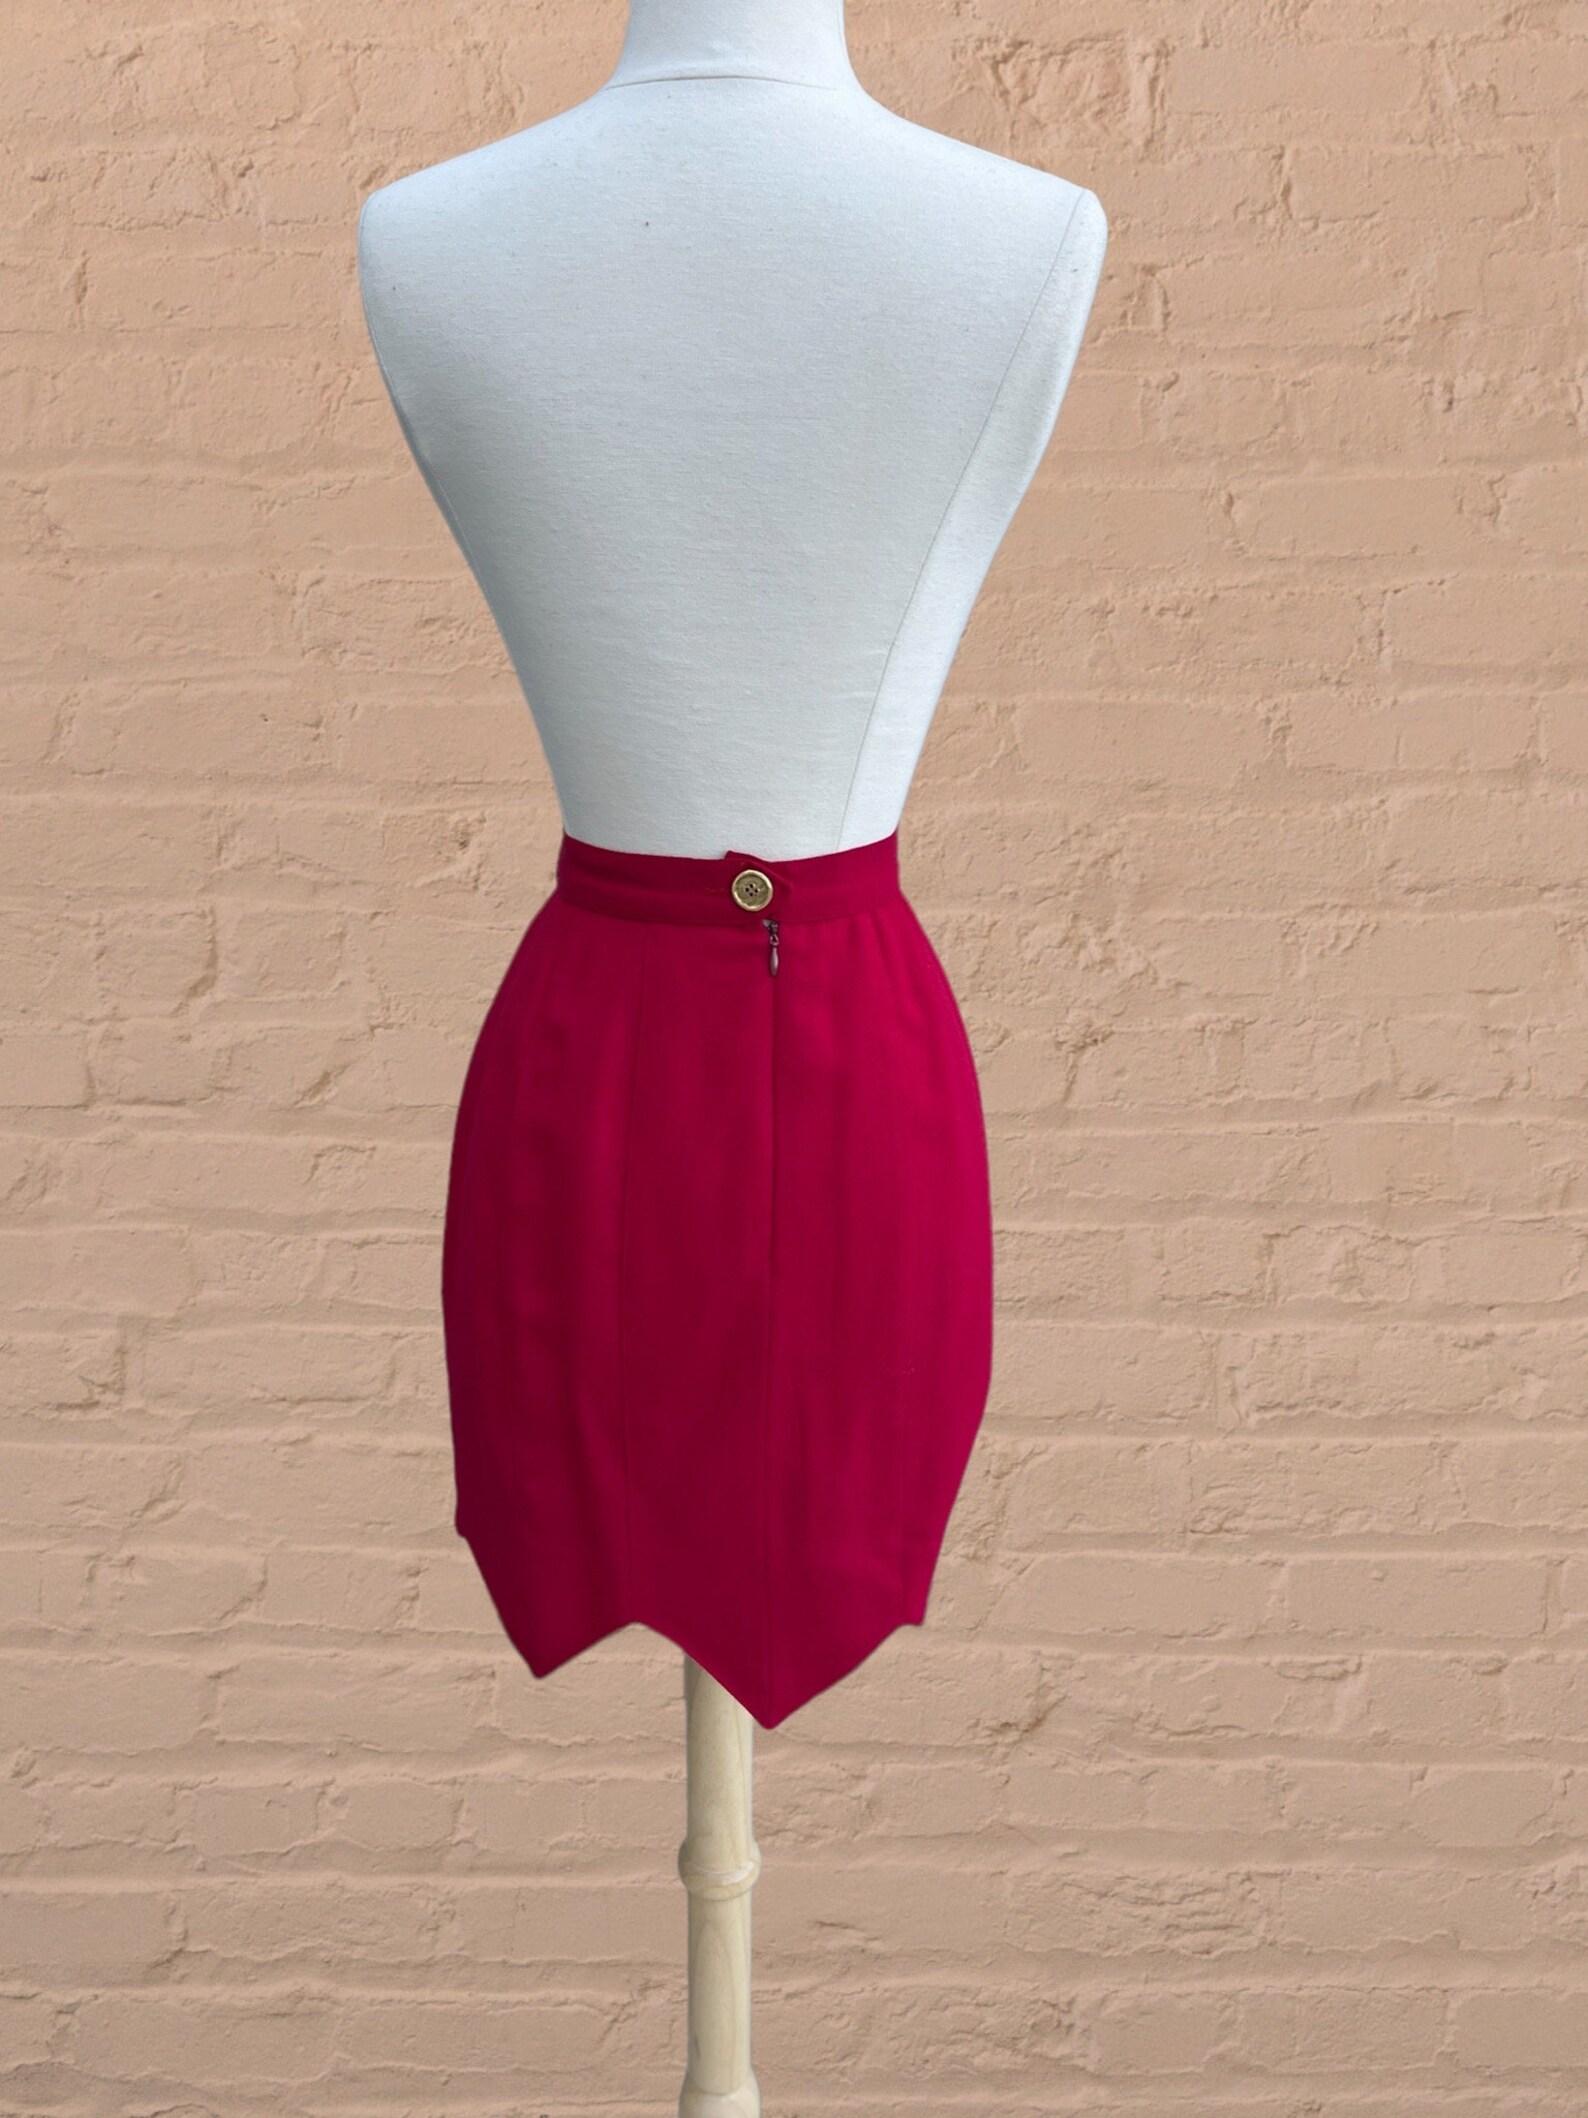 Gemma Kahng Berry Pink Wool Mini Skirt, Circa 1990s For Sale 2